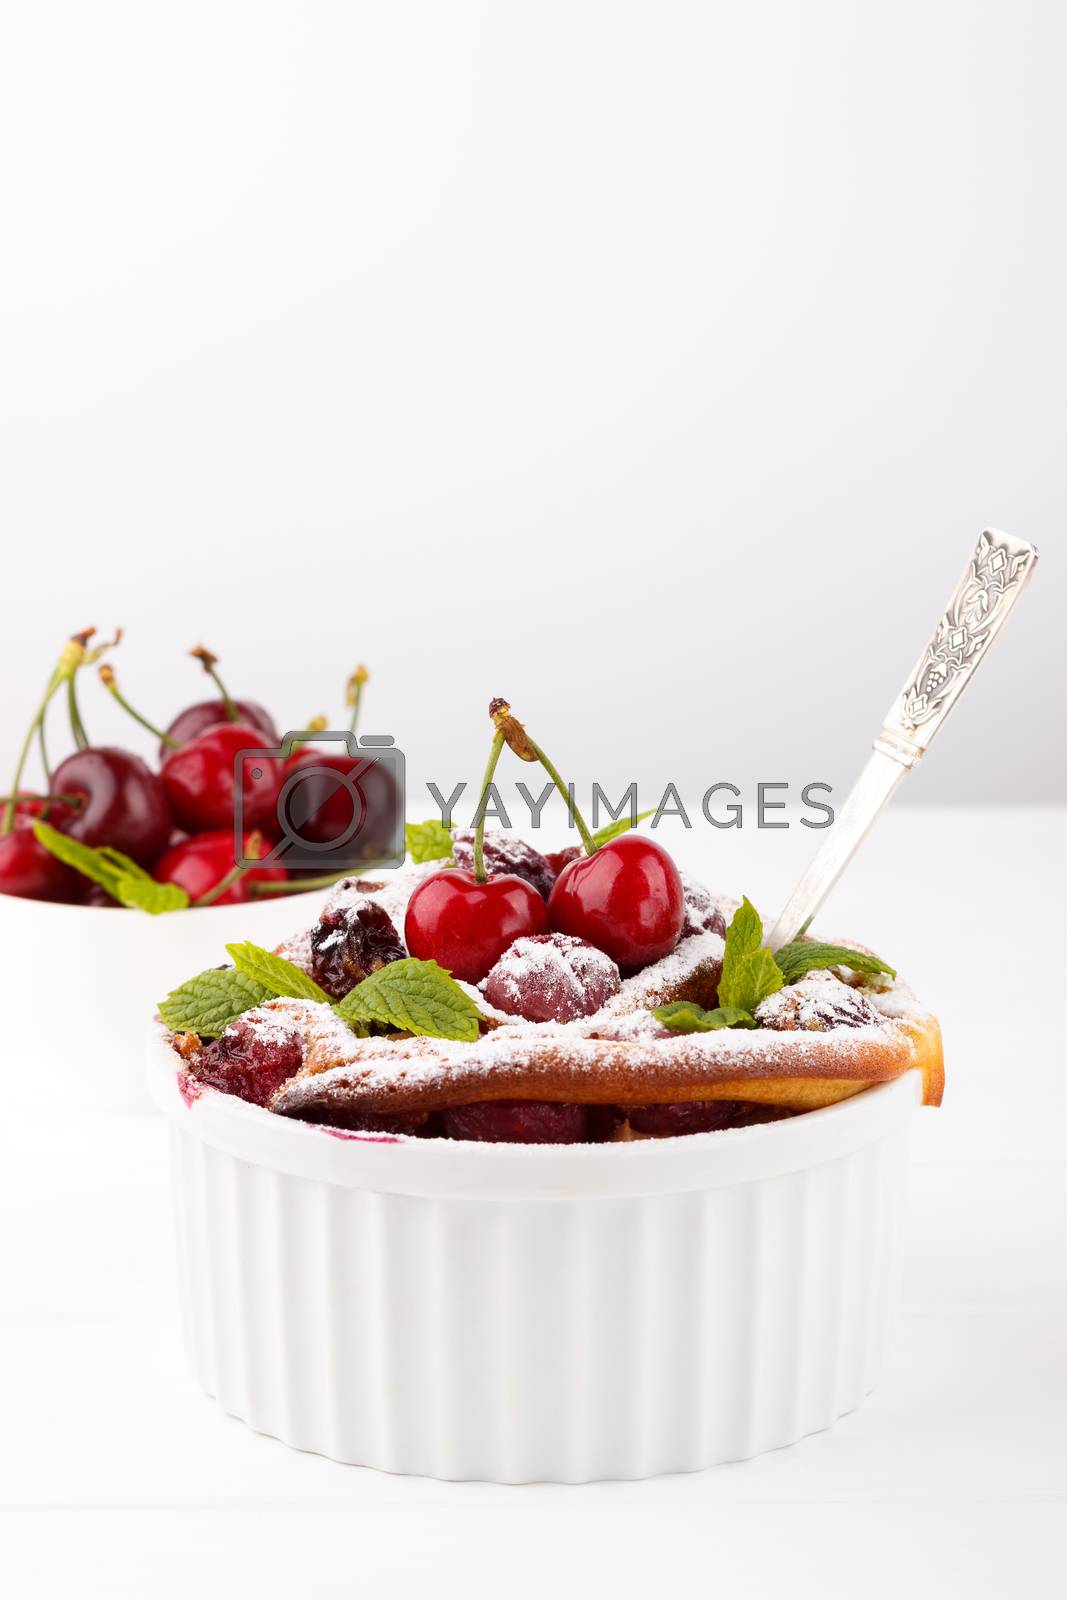 Royalty free image of French clafoutis with cherry by Lana_M